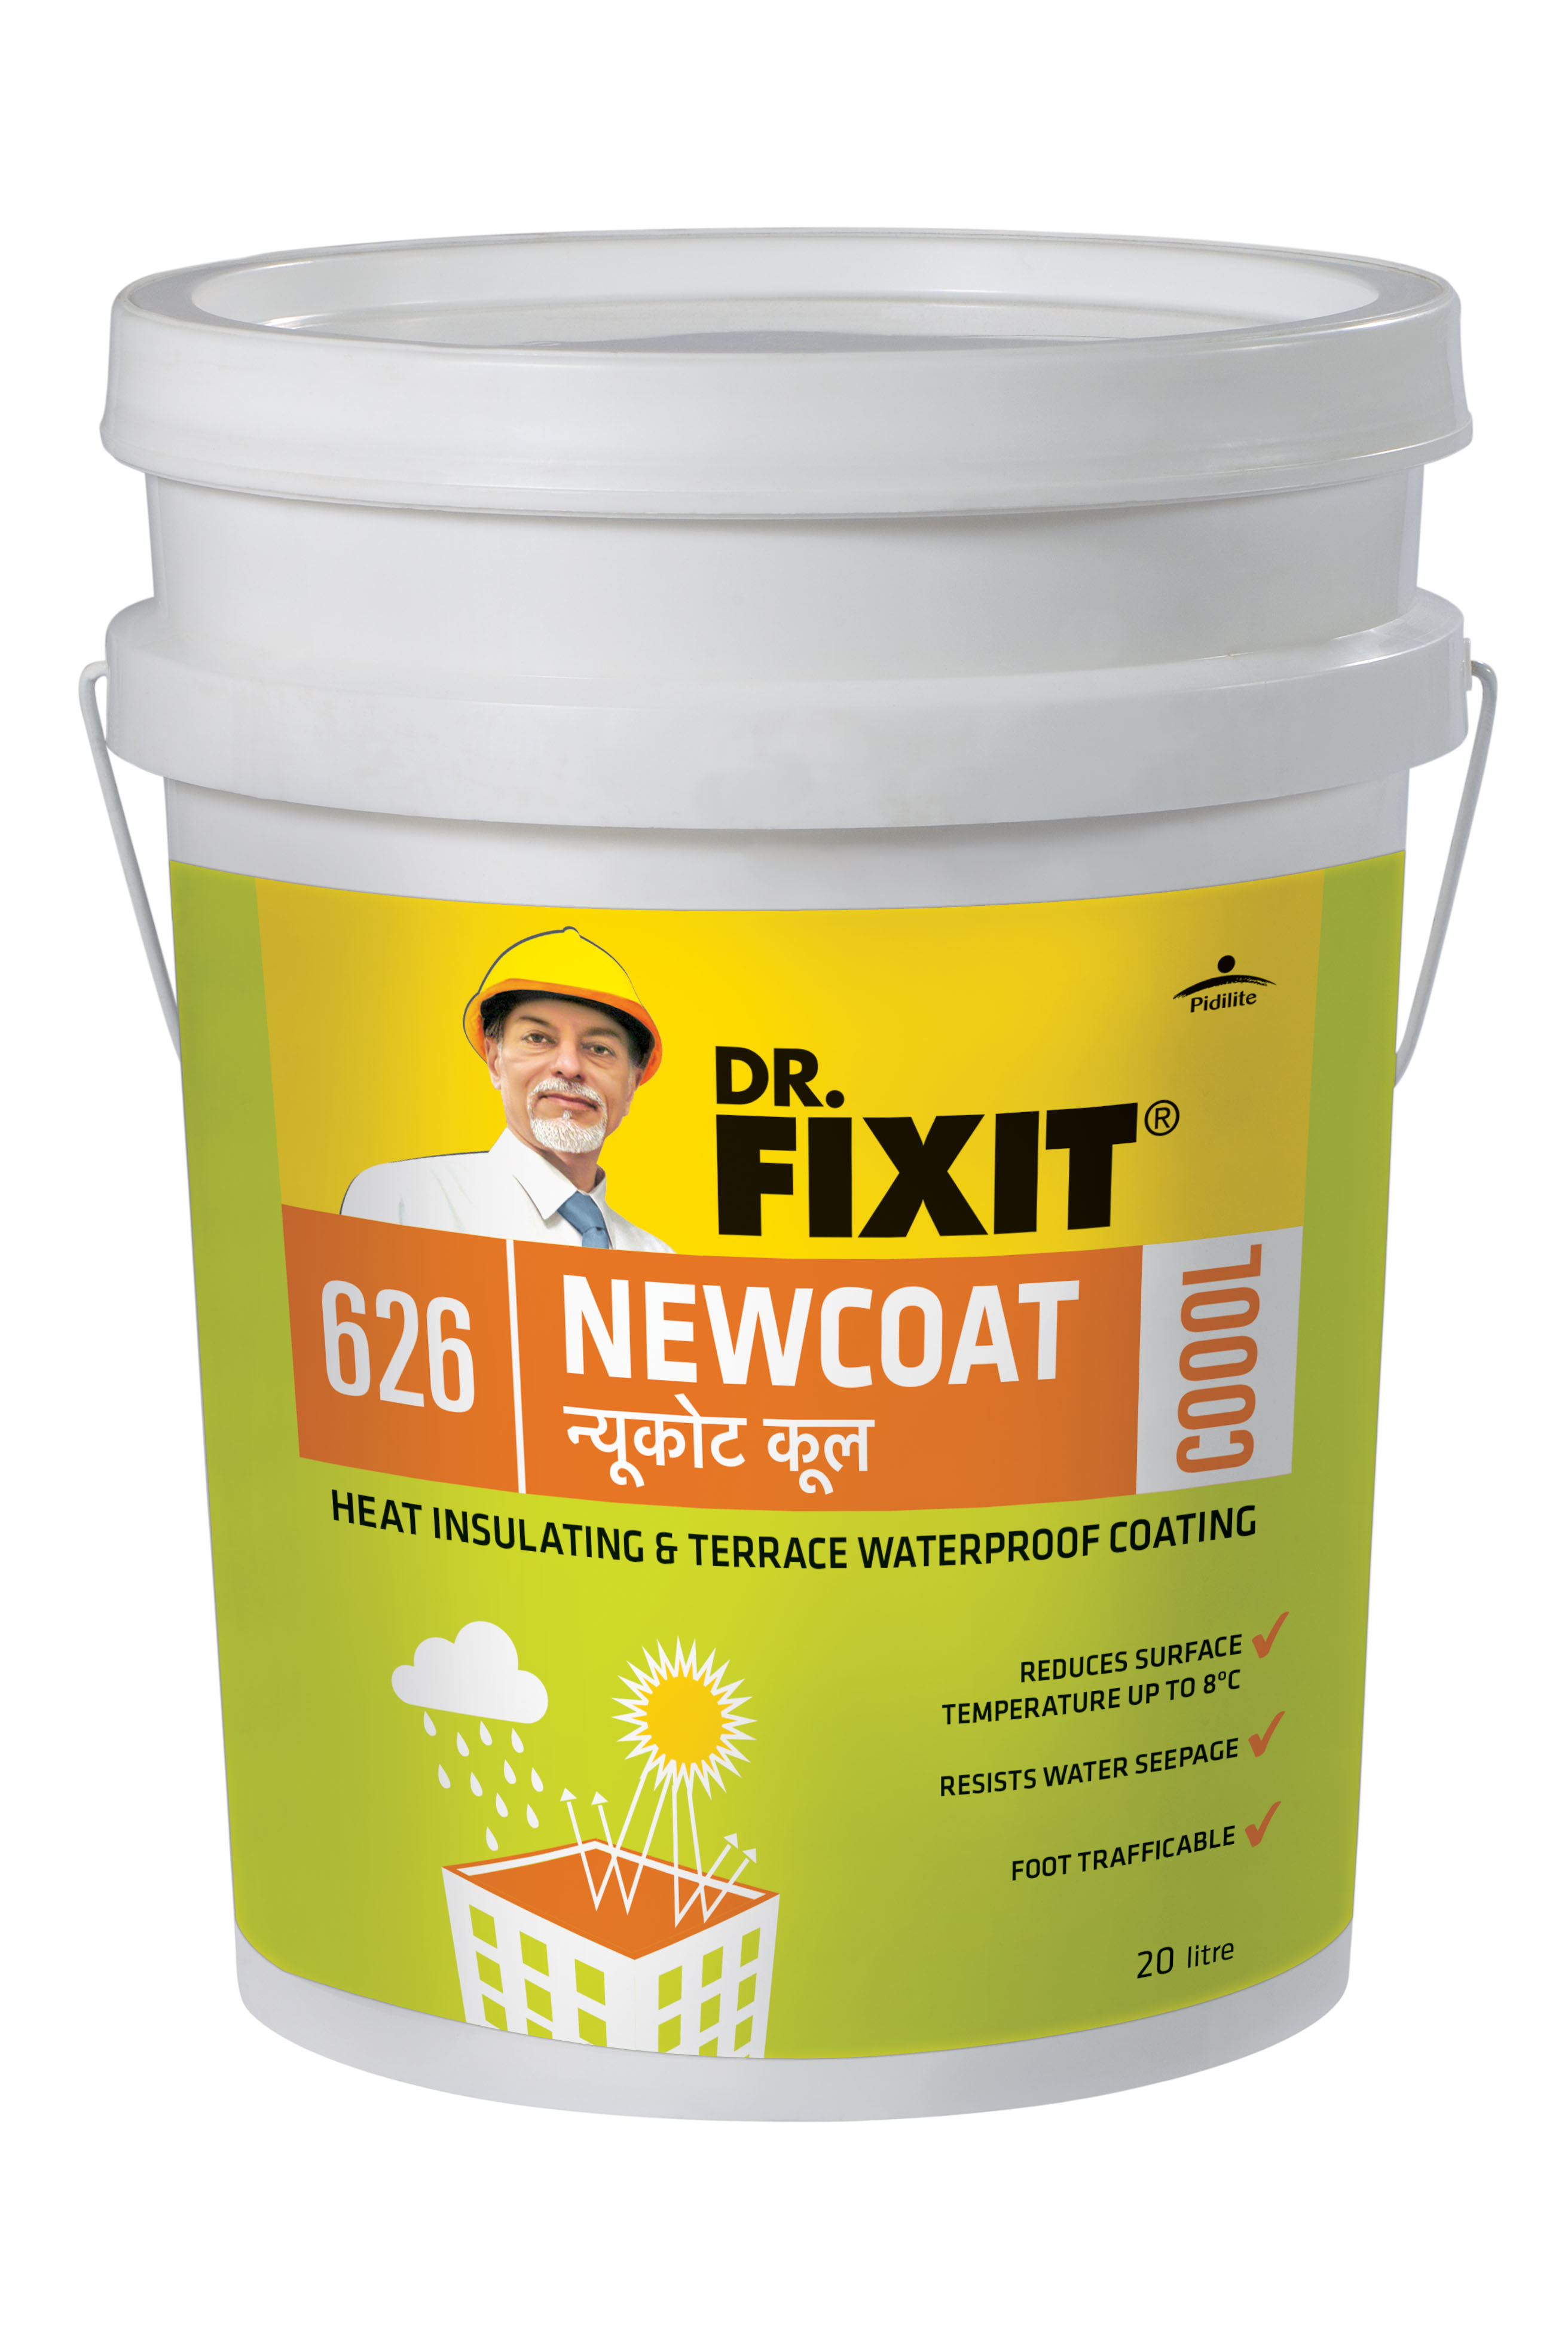 Dr Fixit Newcoat Coool price 1 ltr, 20 litre price, colours shades, 10 4 colors